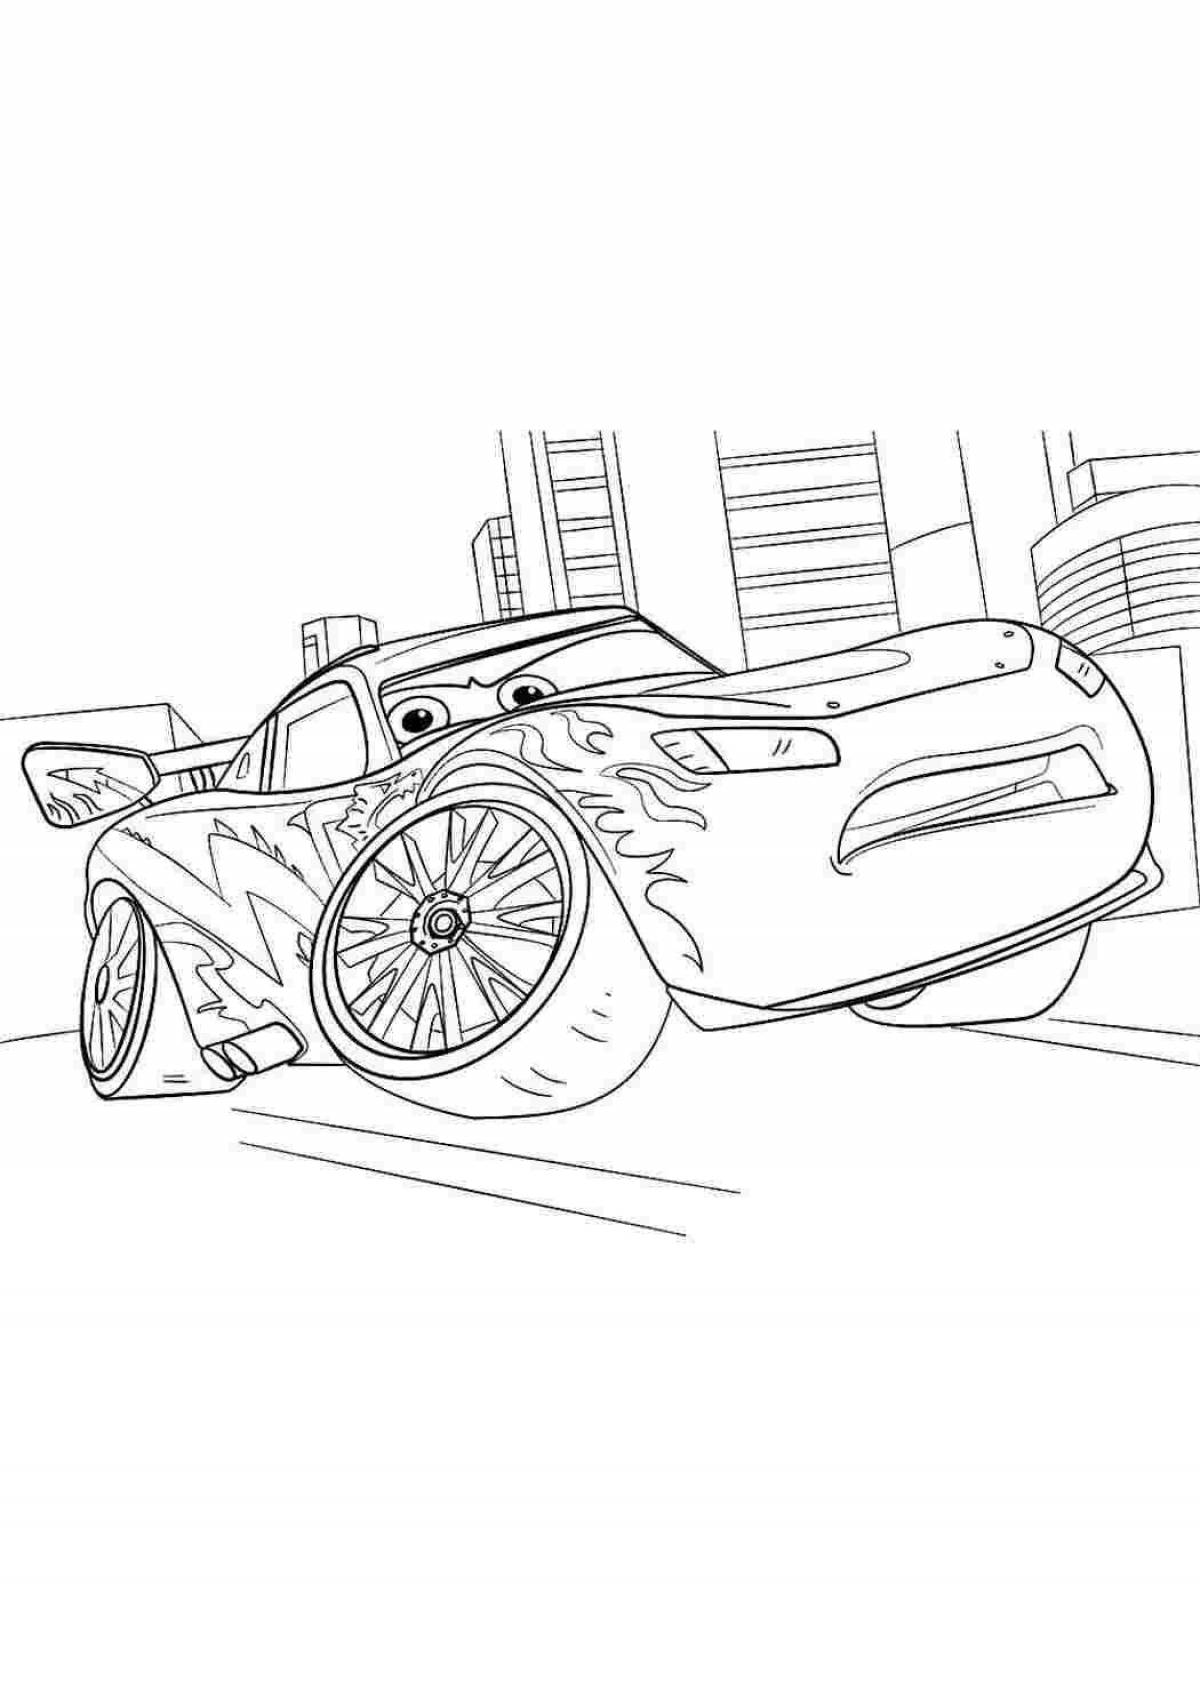 Colorful watchcar coloring page